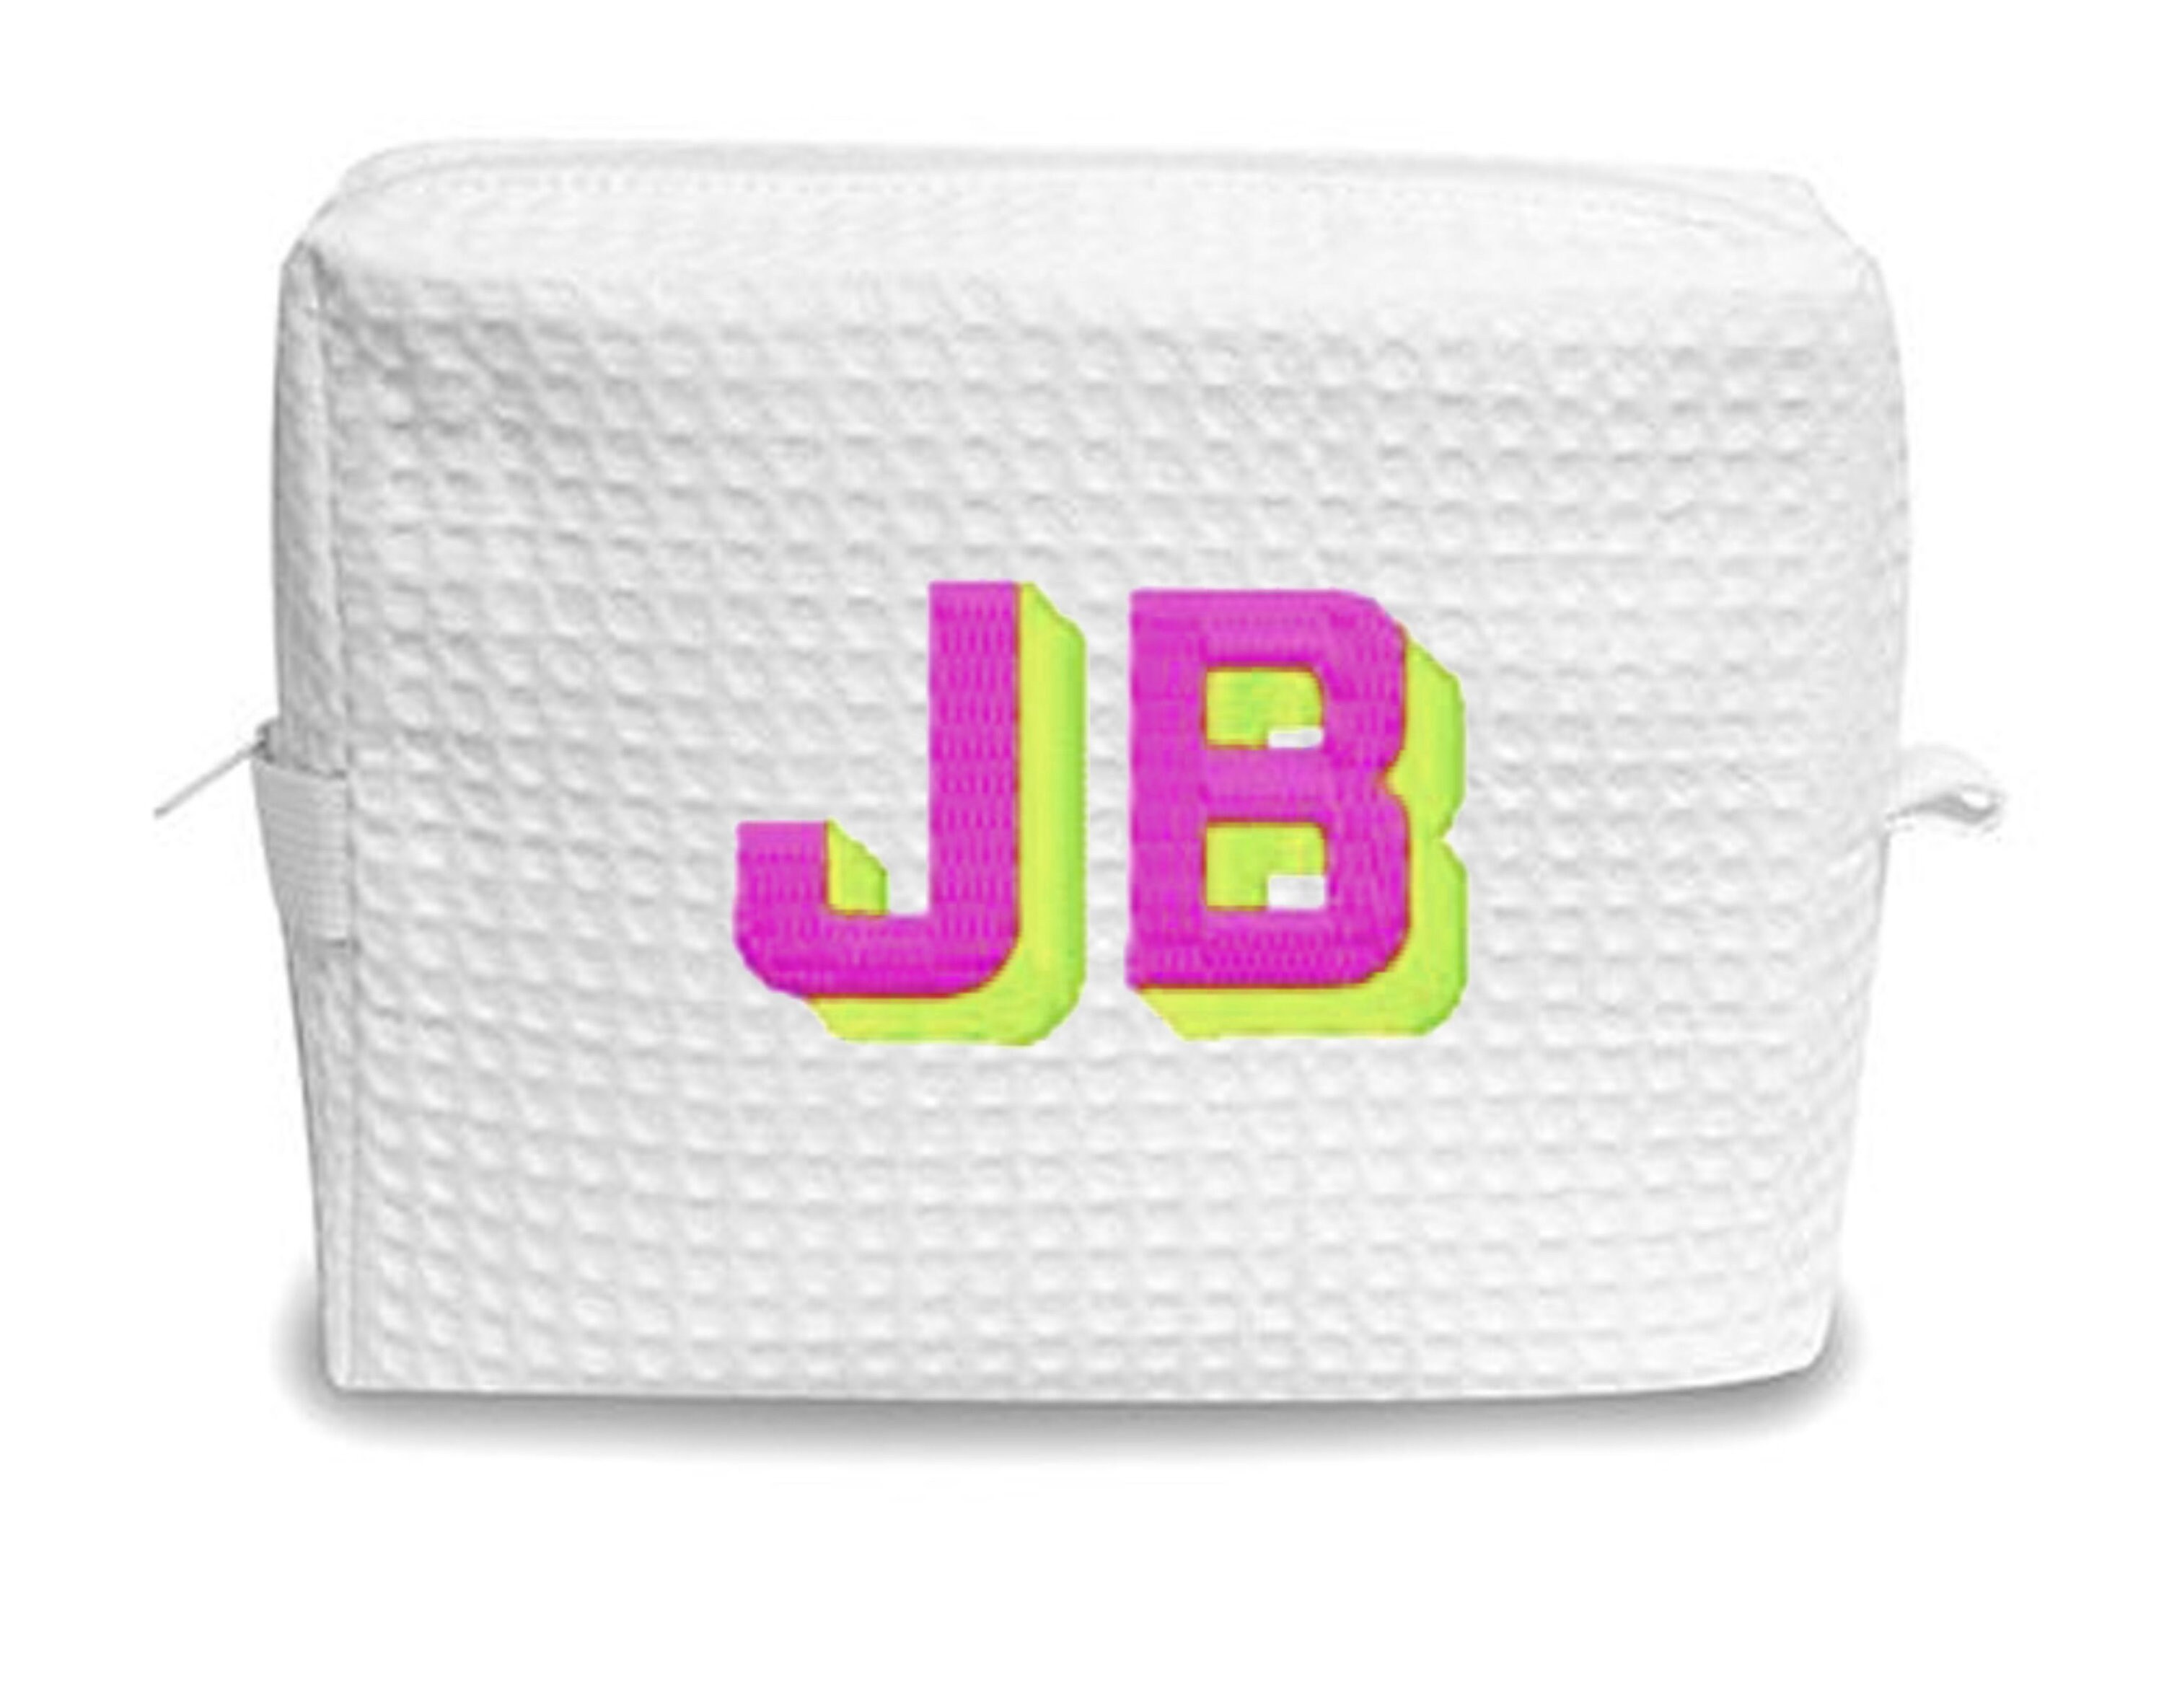 Personalized Cosmetic Case with Shadow Monogram – Cotton Sisters